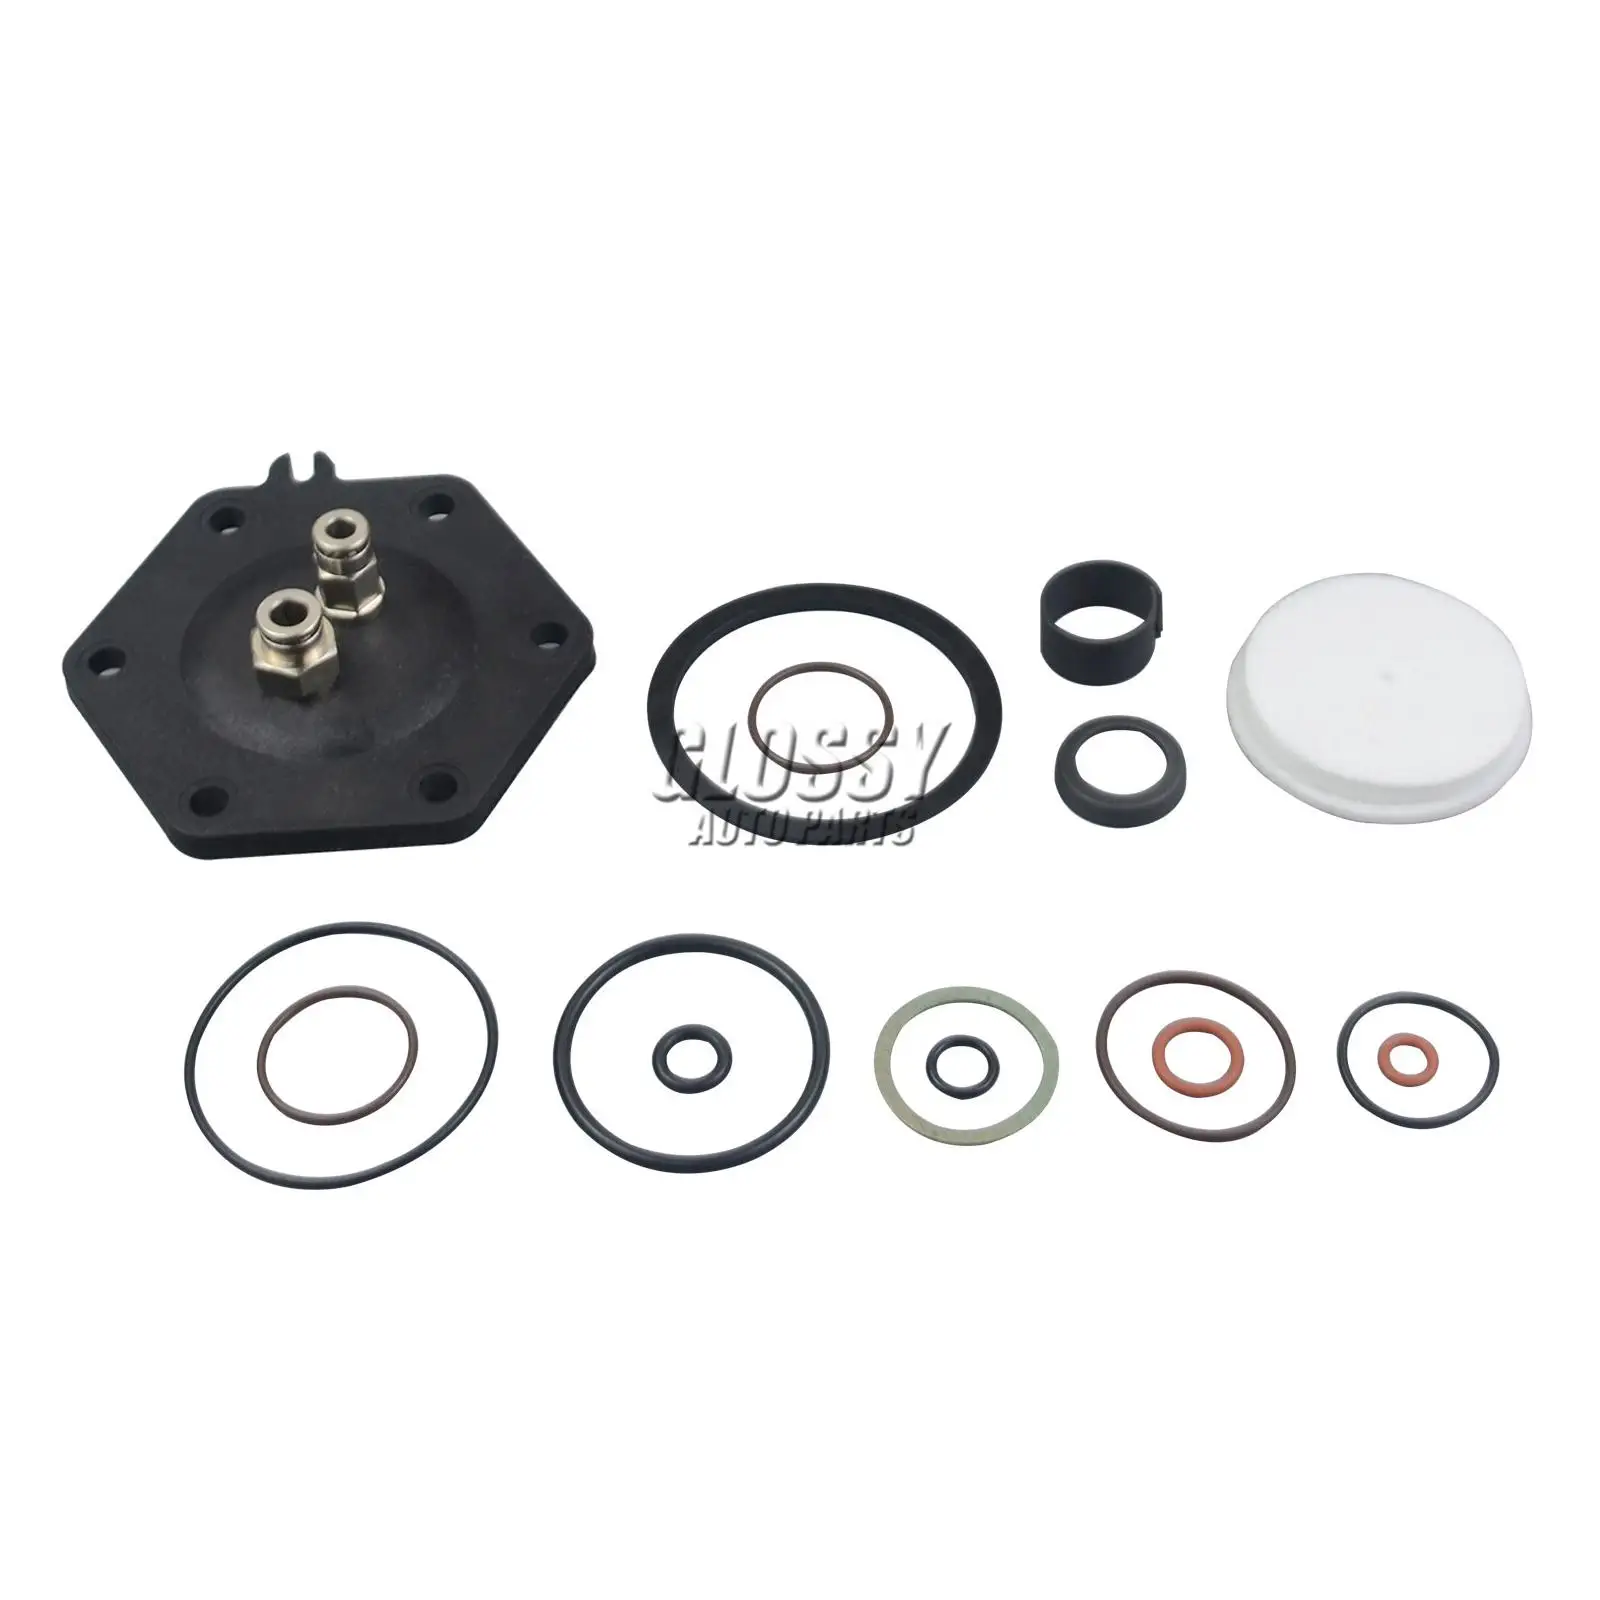 LAND ROVER RANGE ROVER SPORT HITACHI AIR COMPRESSOR AND FILTER DRYER REPAIR KIT